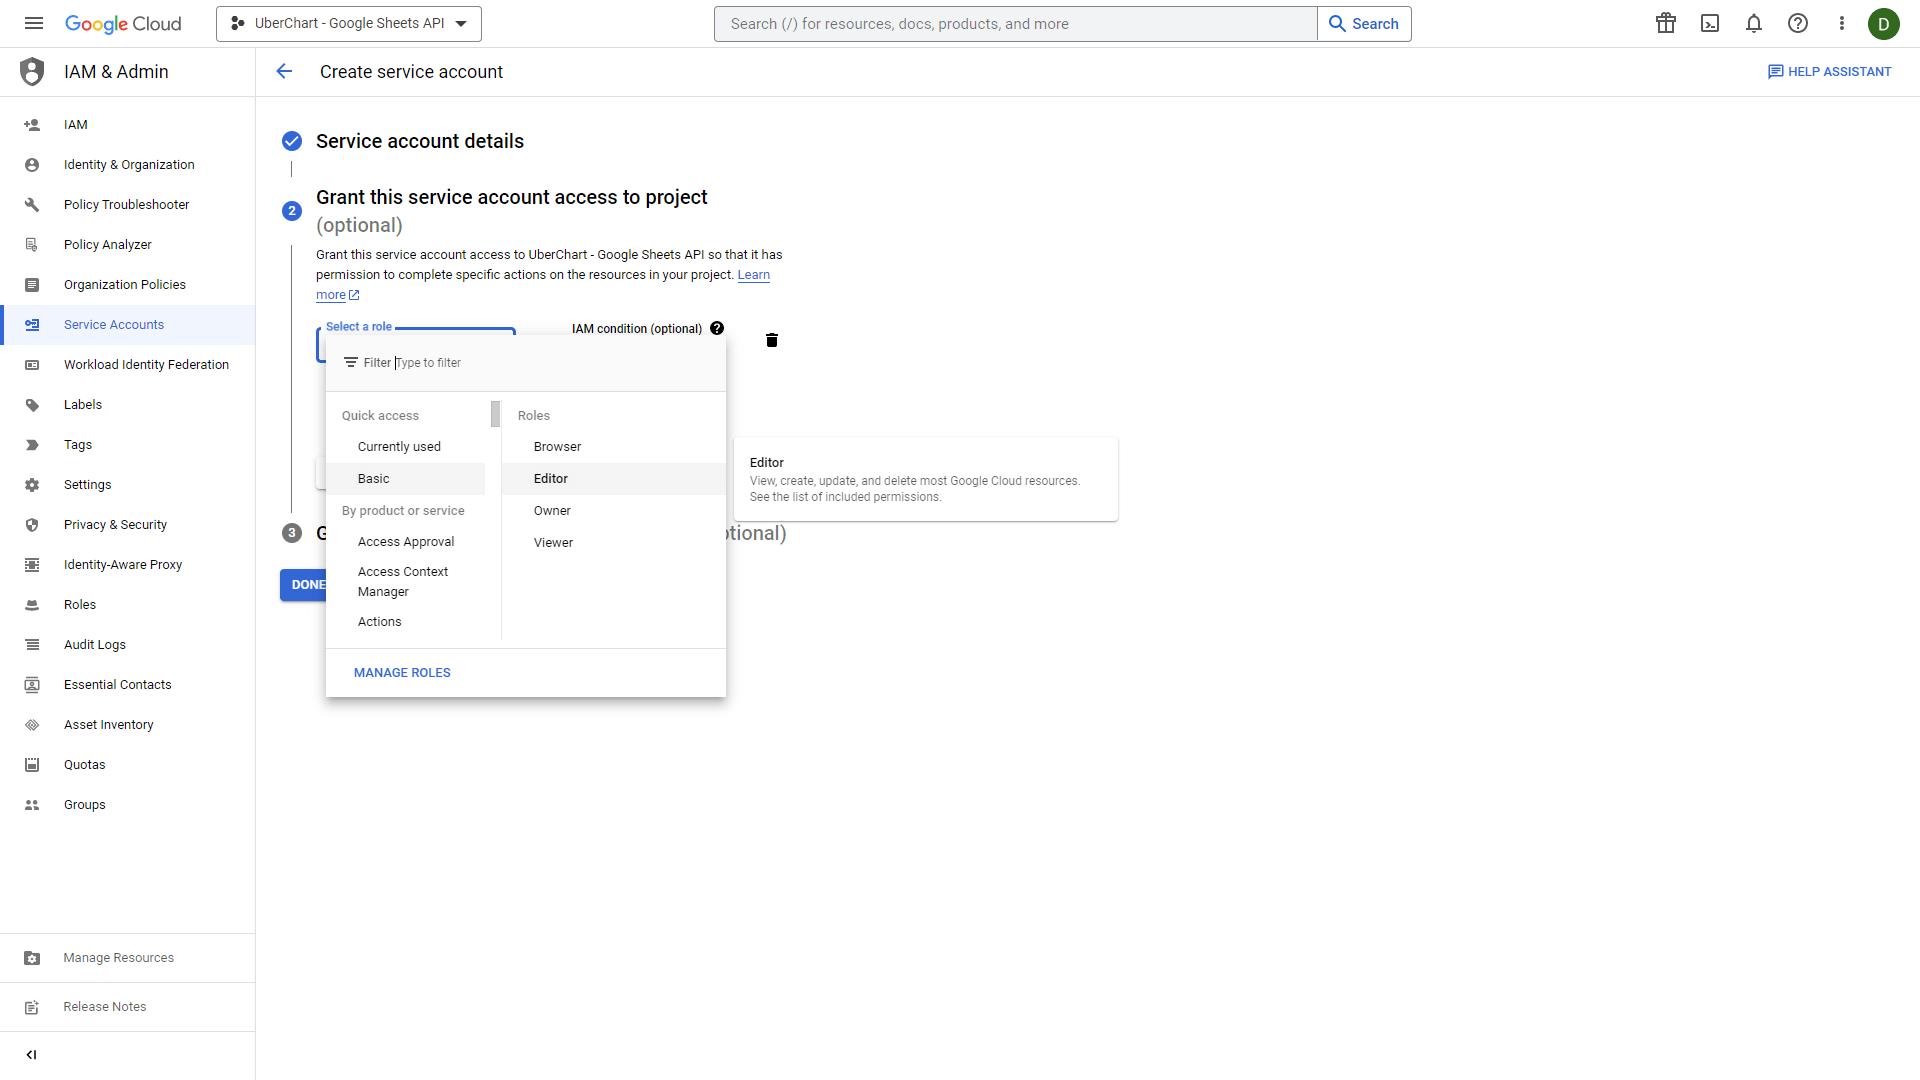 The "Grant this service account access to project" form with the Basic/Editor option selected.